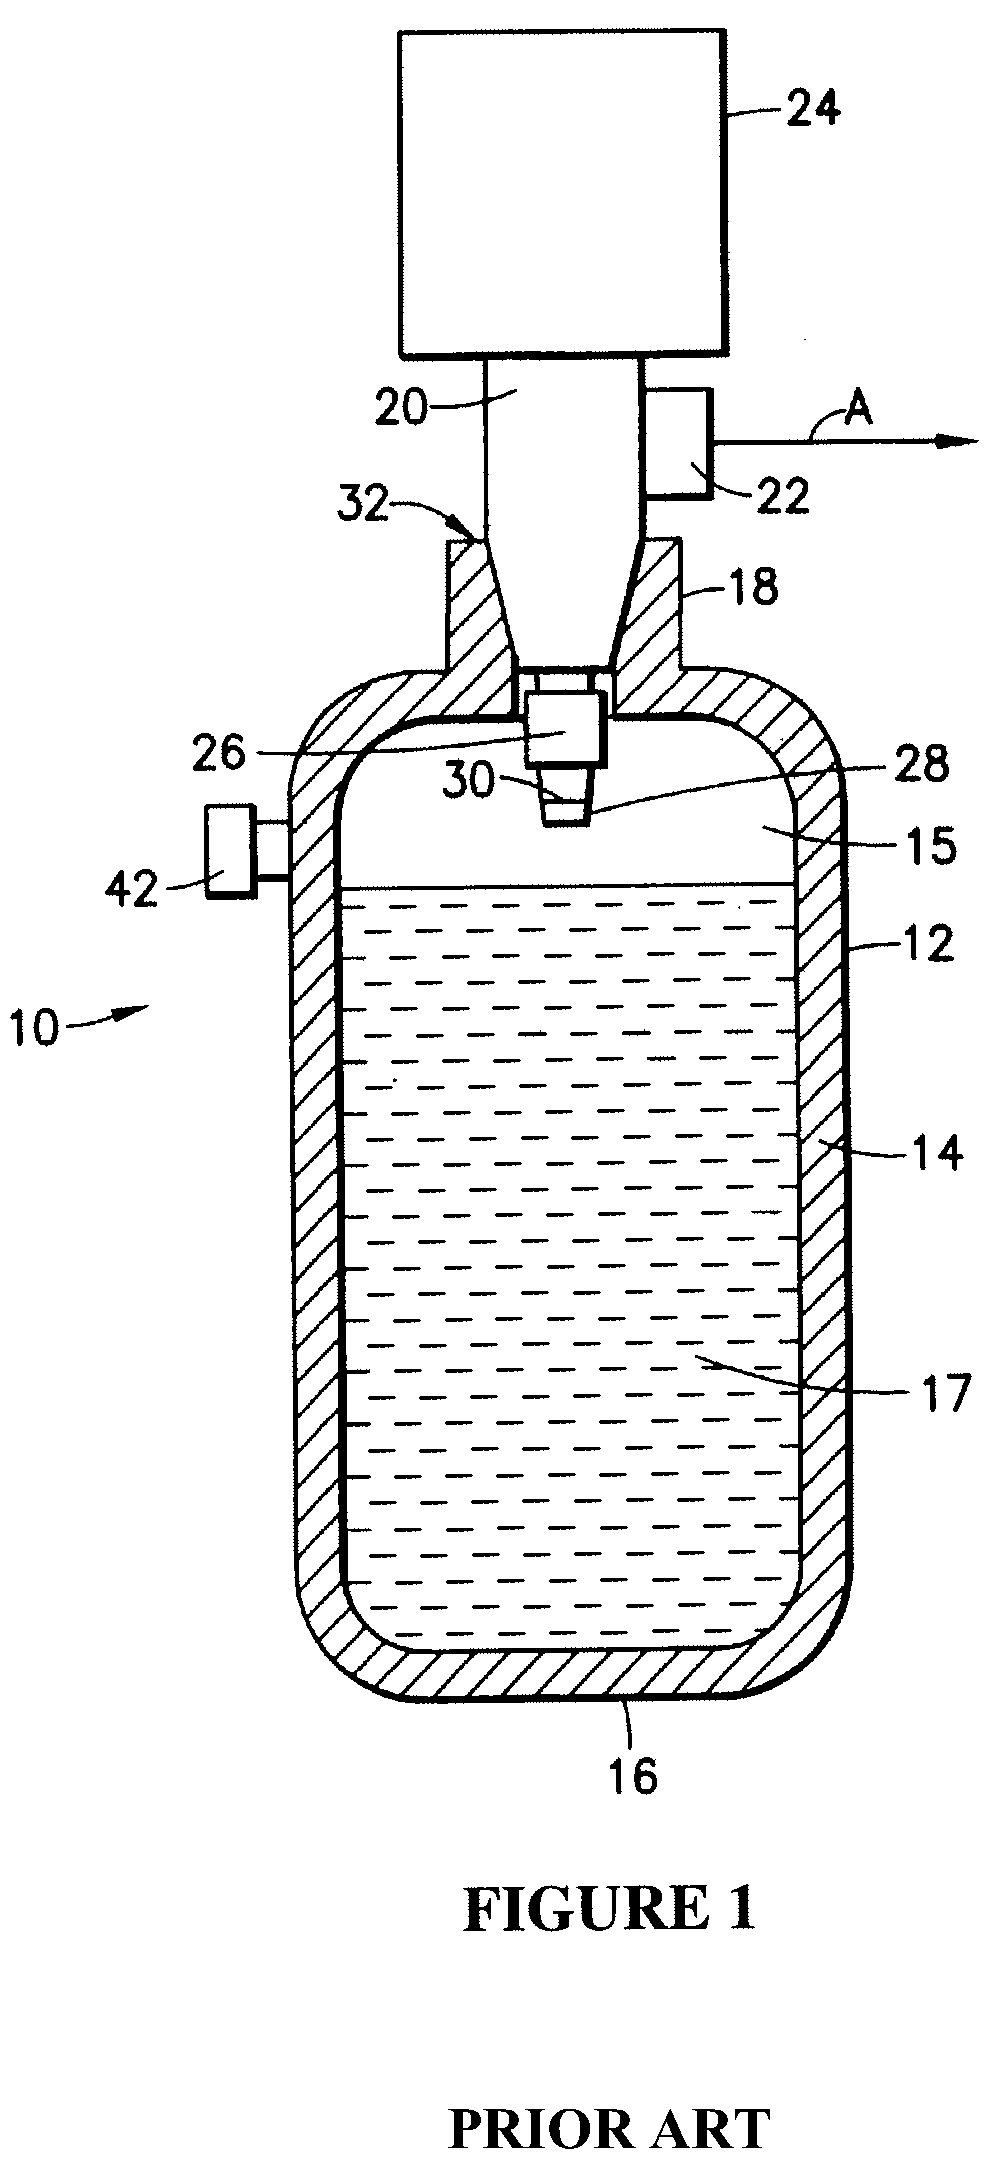 Apparatus and method for hydrogen generation from gaseous hydride